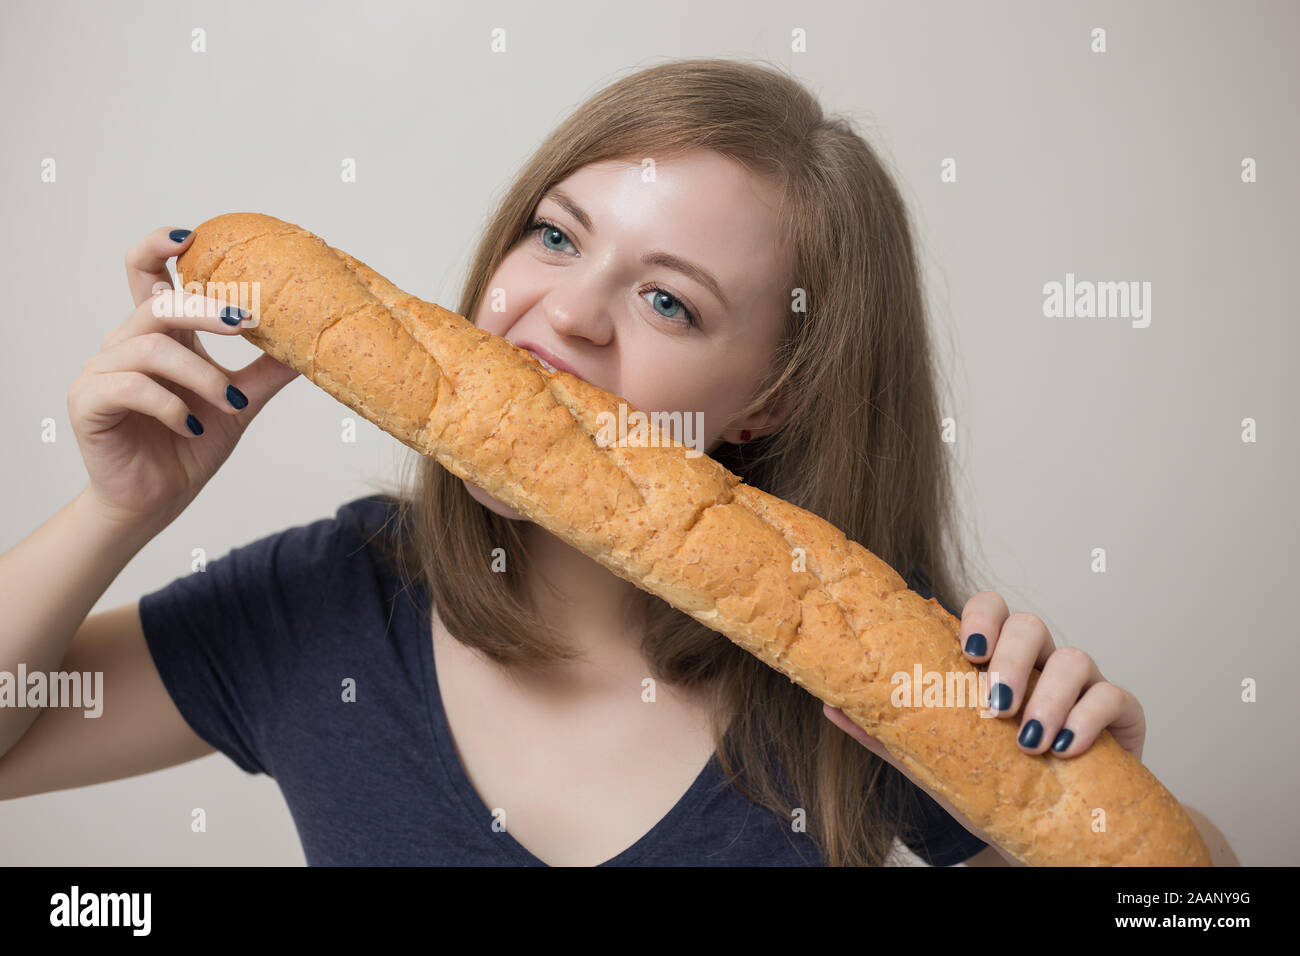 young-caucasian-woman-eats-french-baguette-2AANY9G.jpg